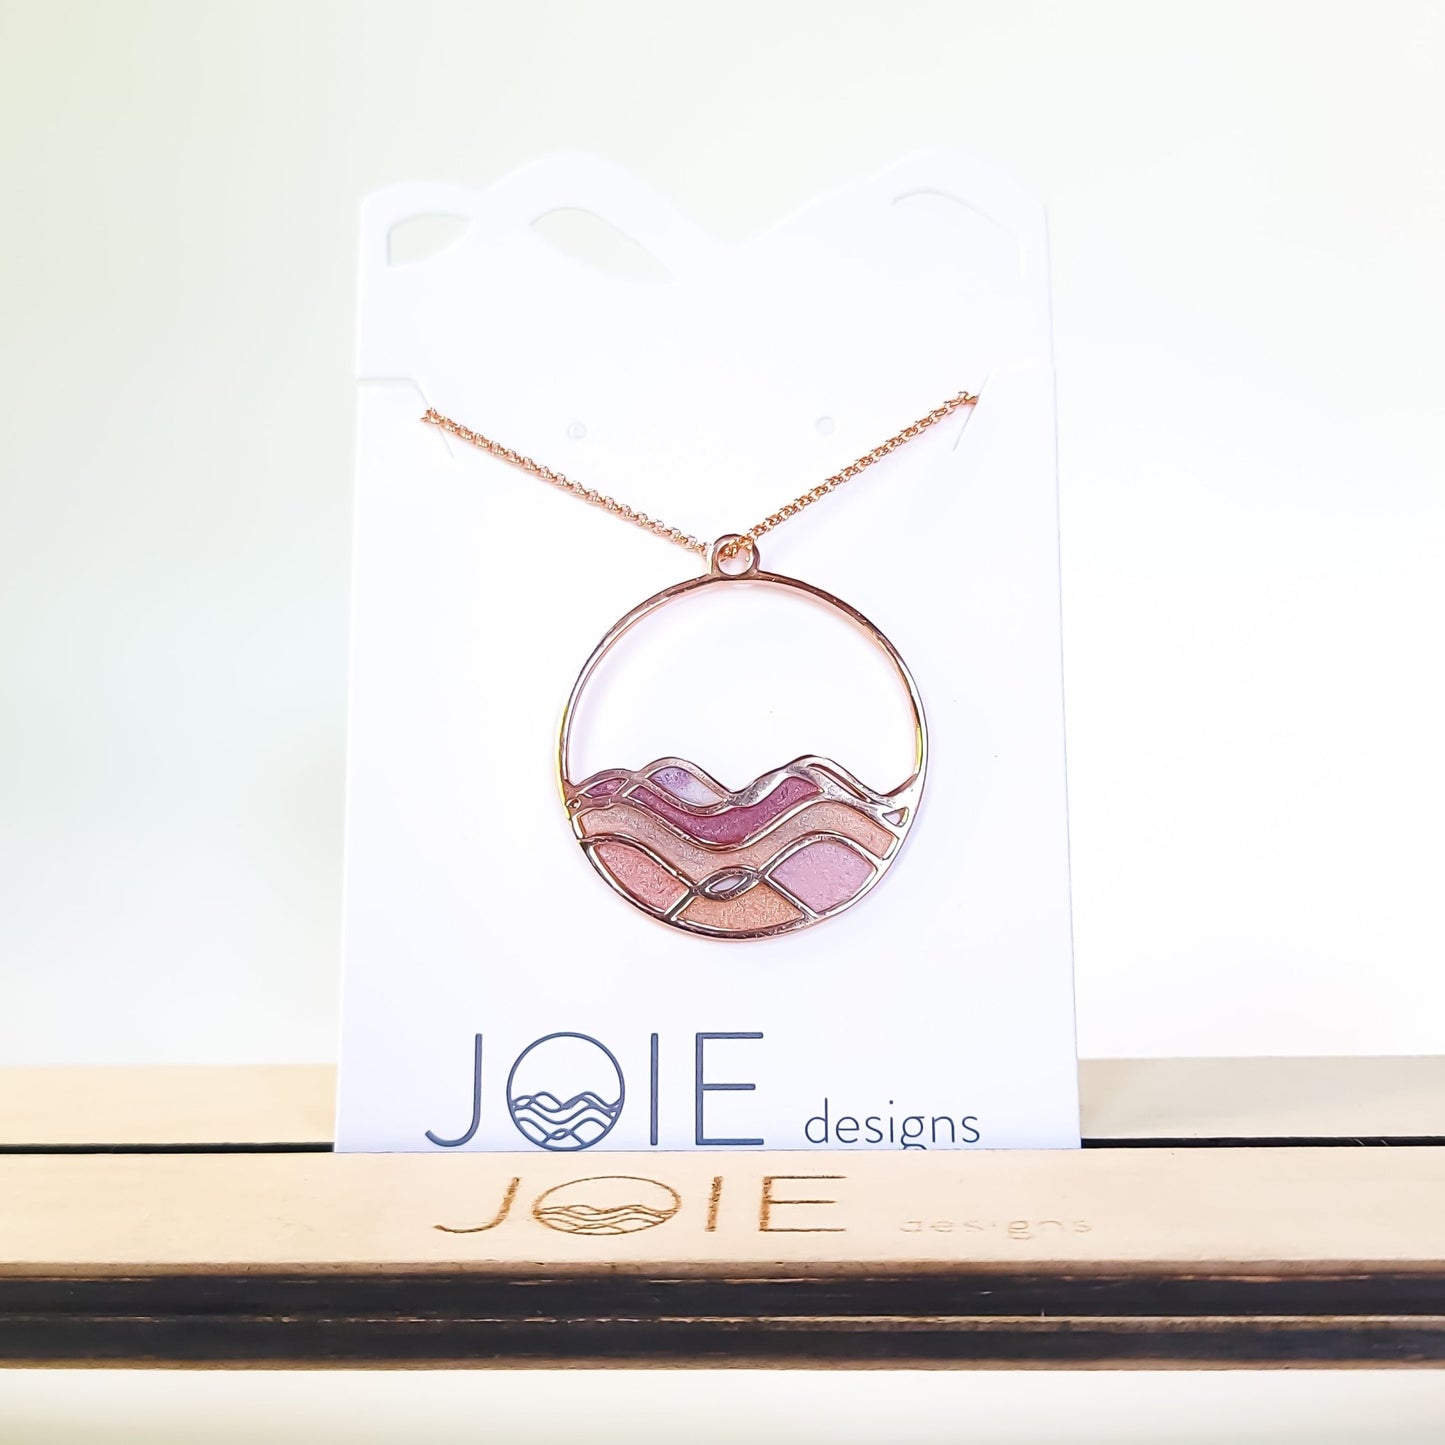 sunset colours on ocean waves rose gold pinks and gold resin in waves circle necklace